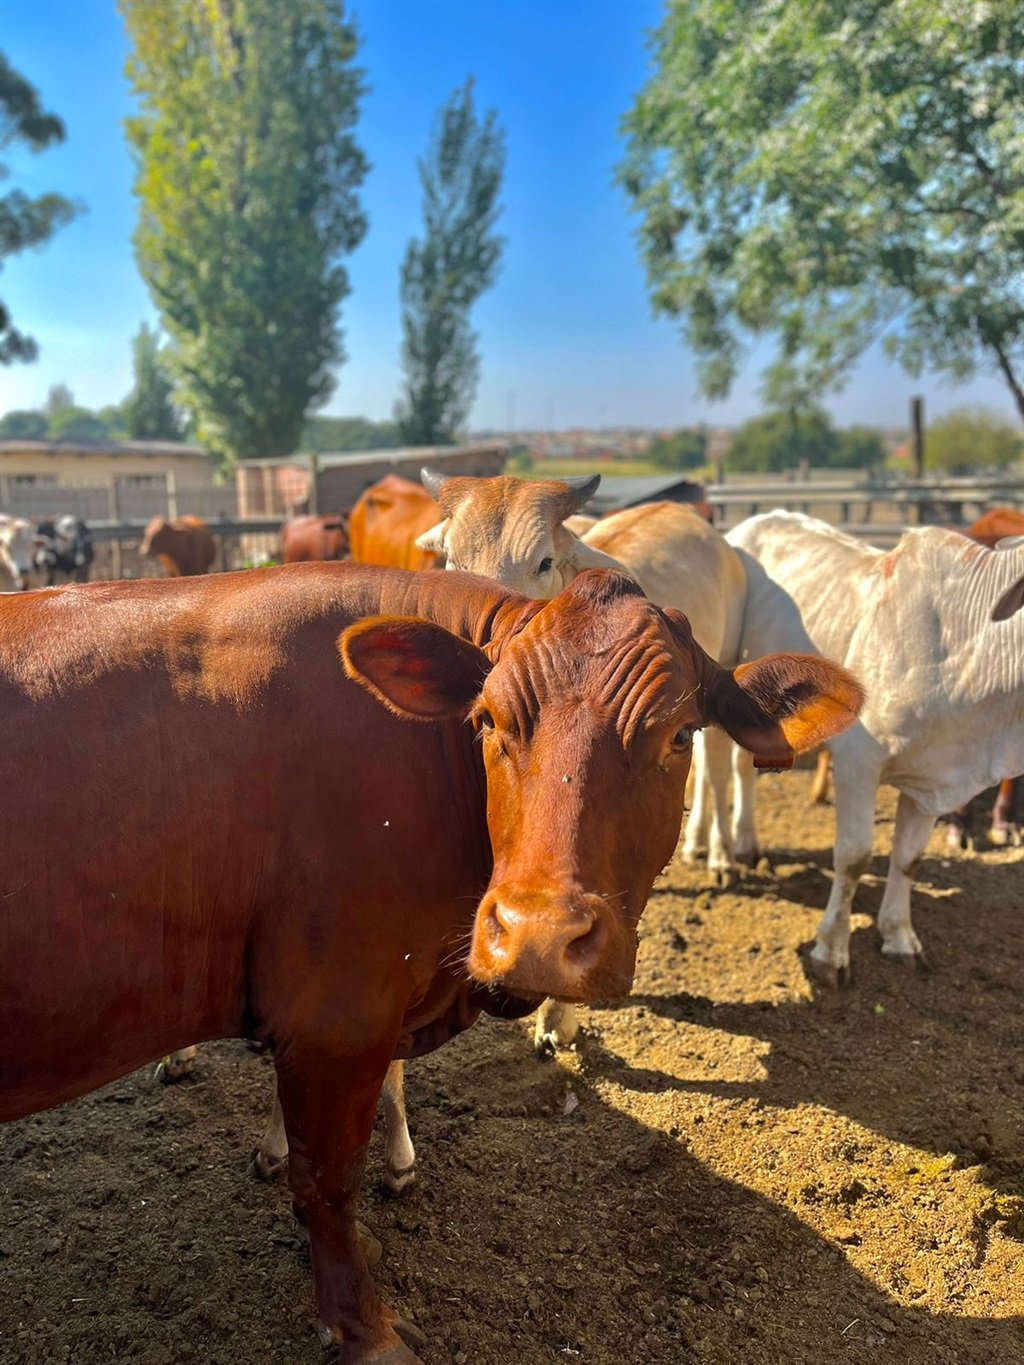 A foot and mouth disease outbreak has raised concerns among cattle owners in the Eastern Cape